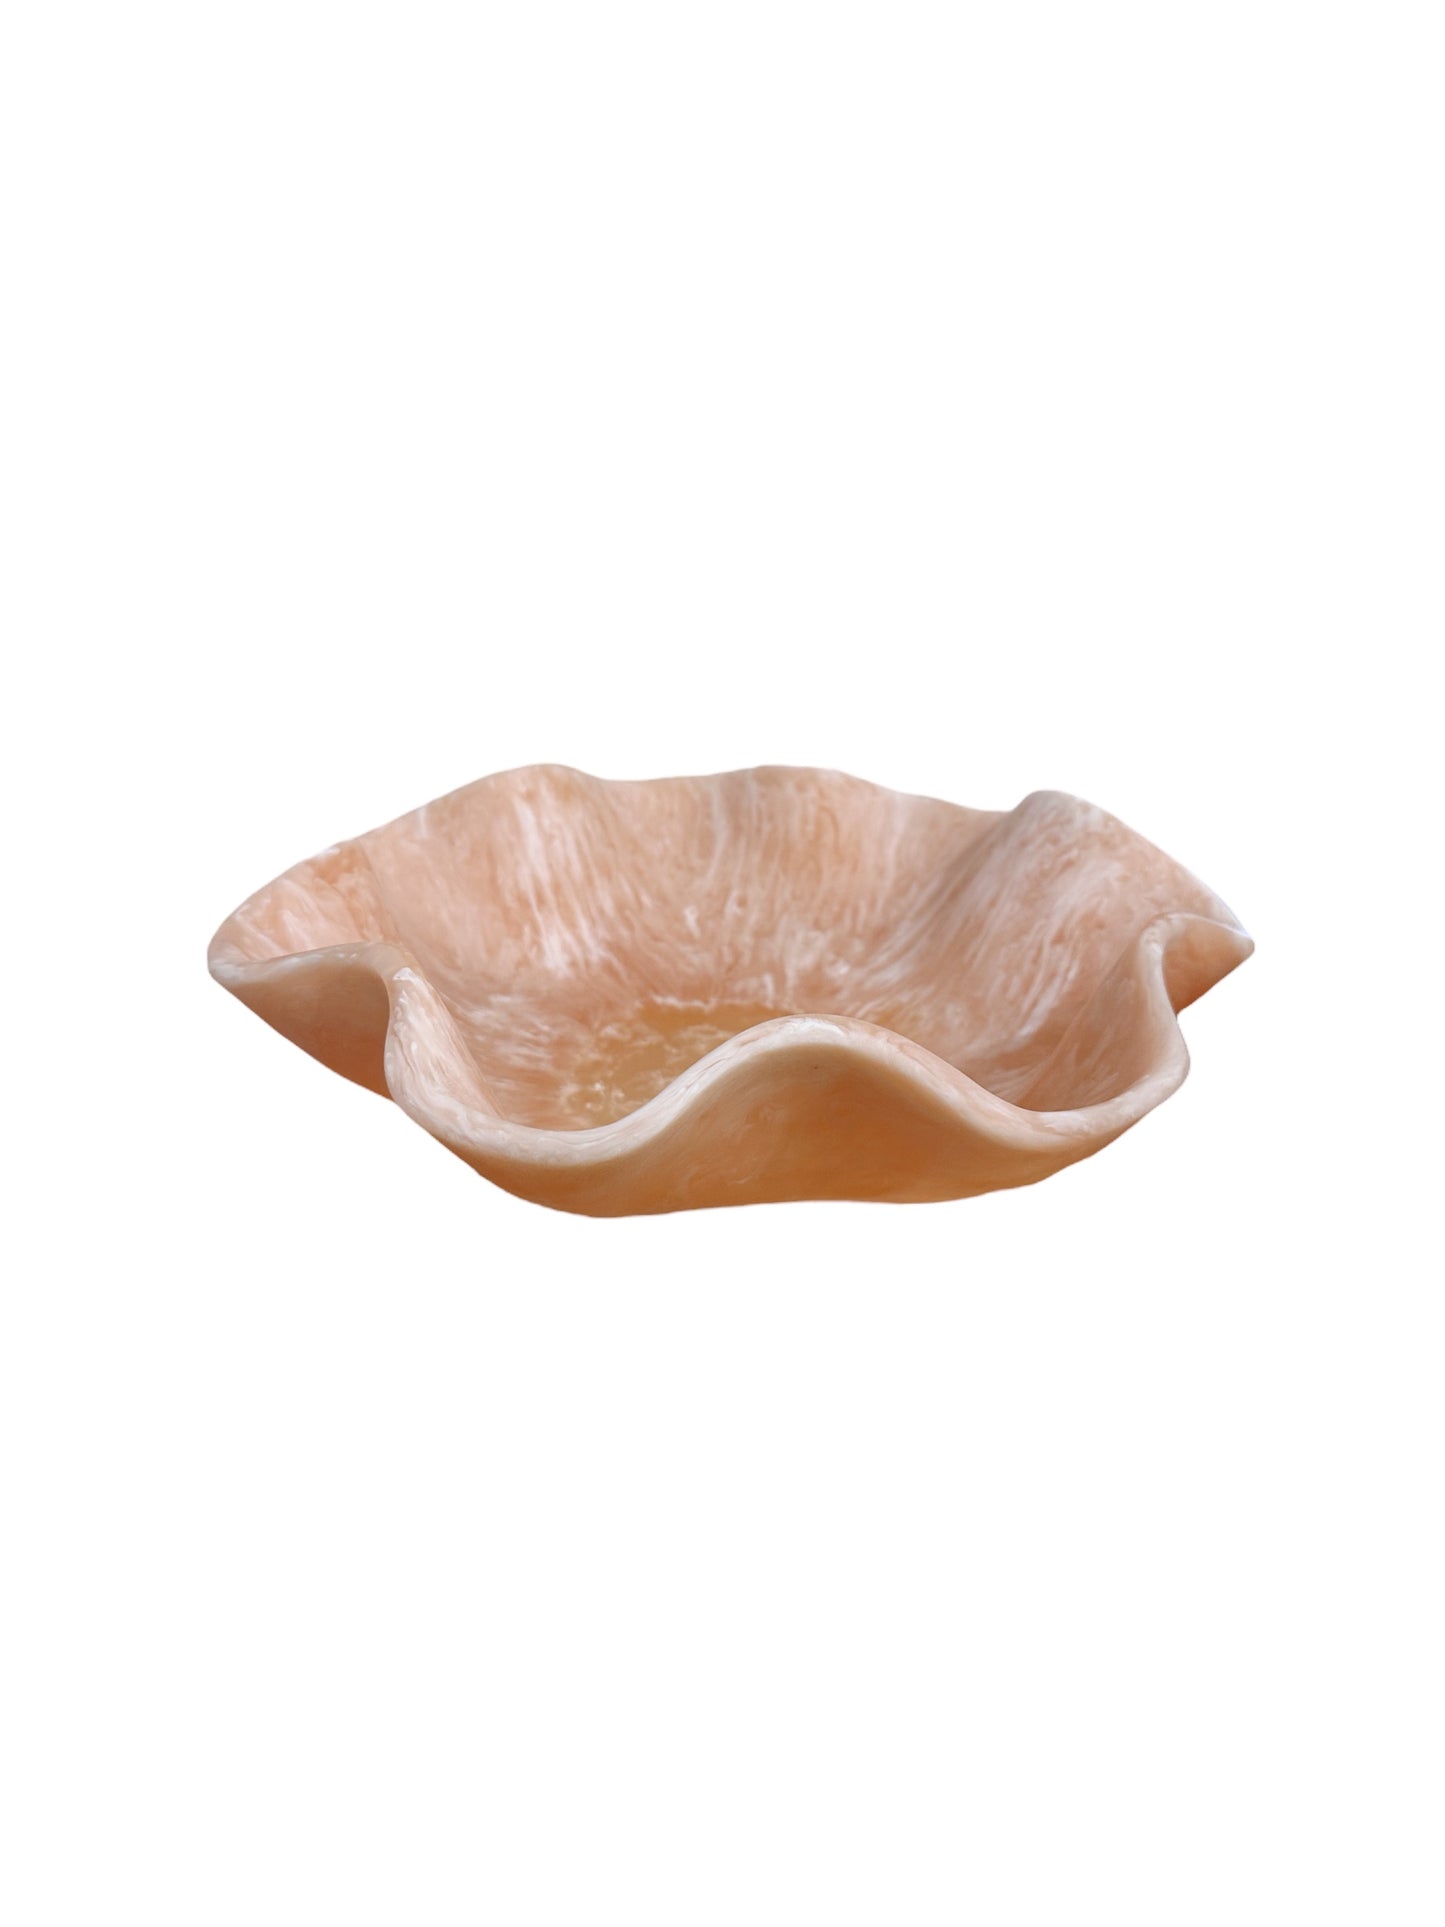 RESIN SQUIGGLE BOWL PEACH